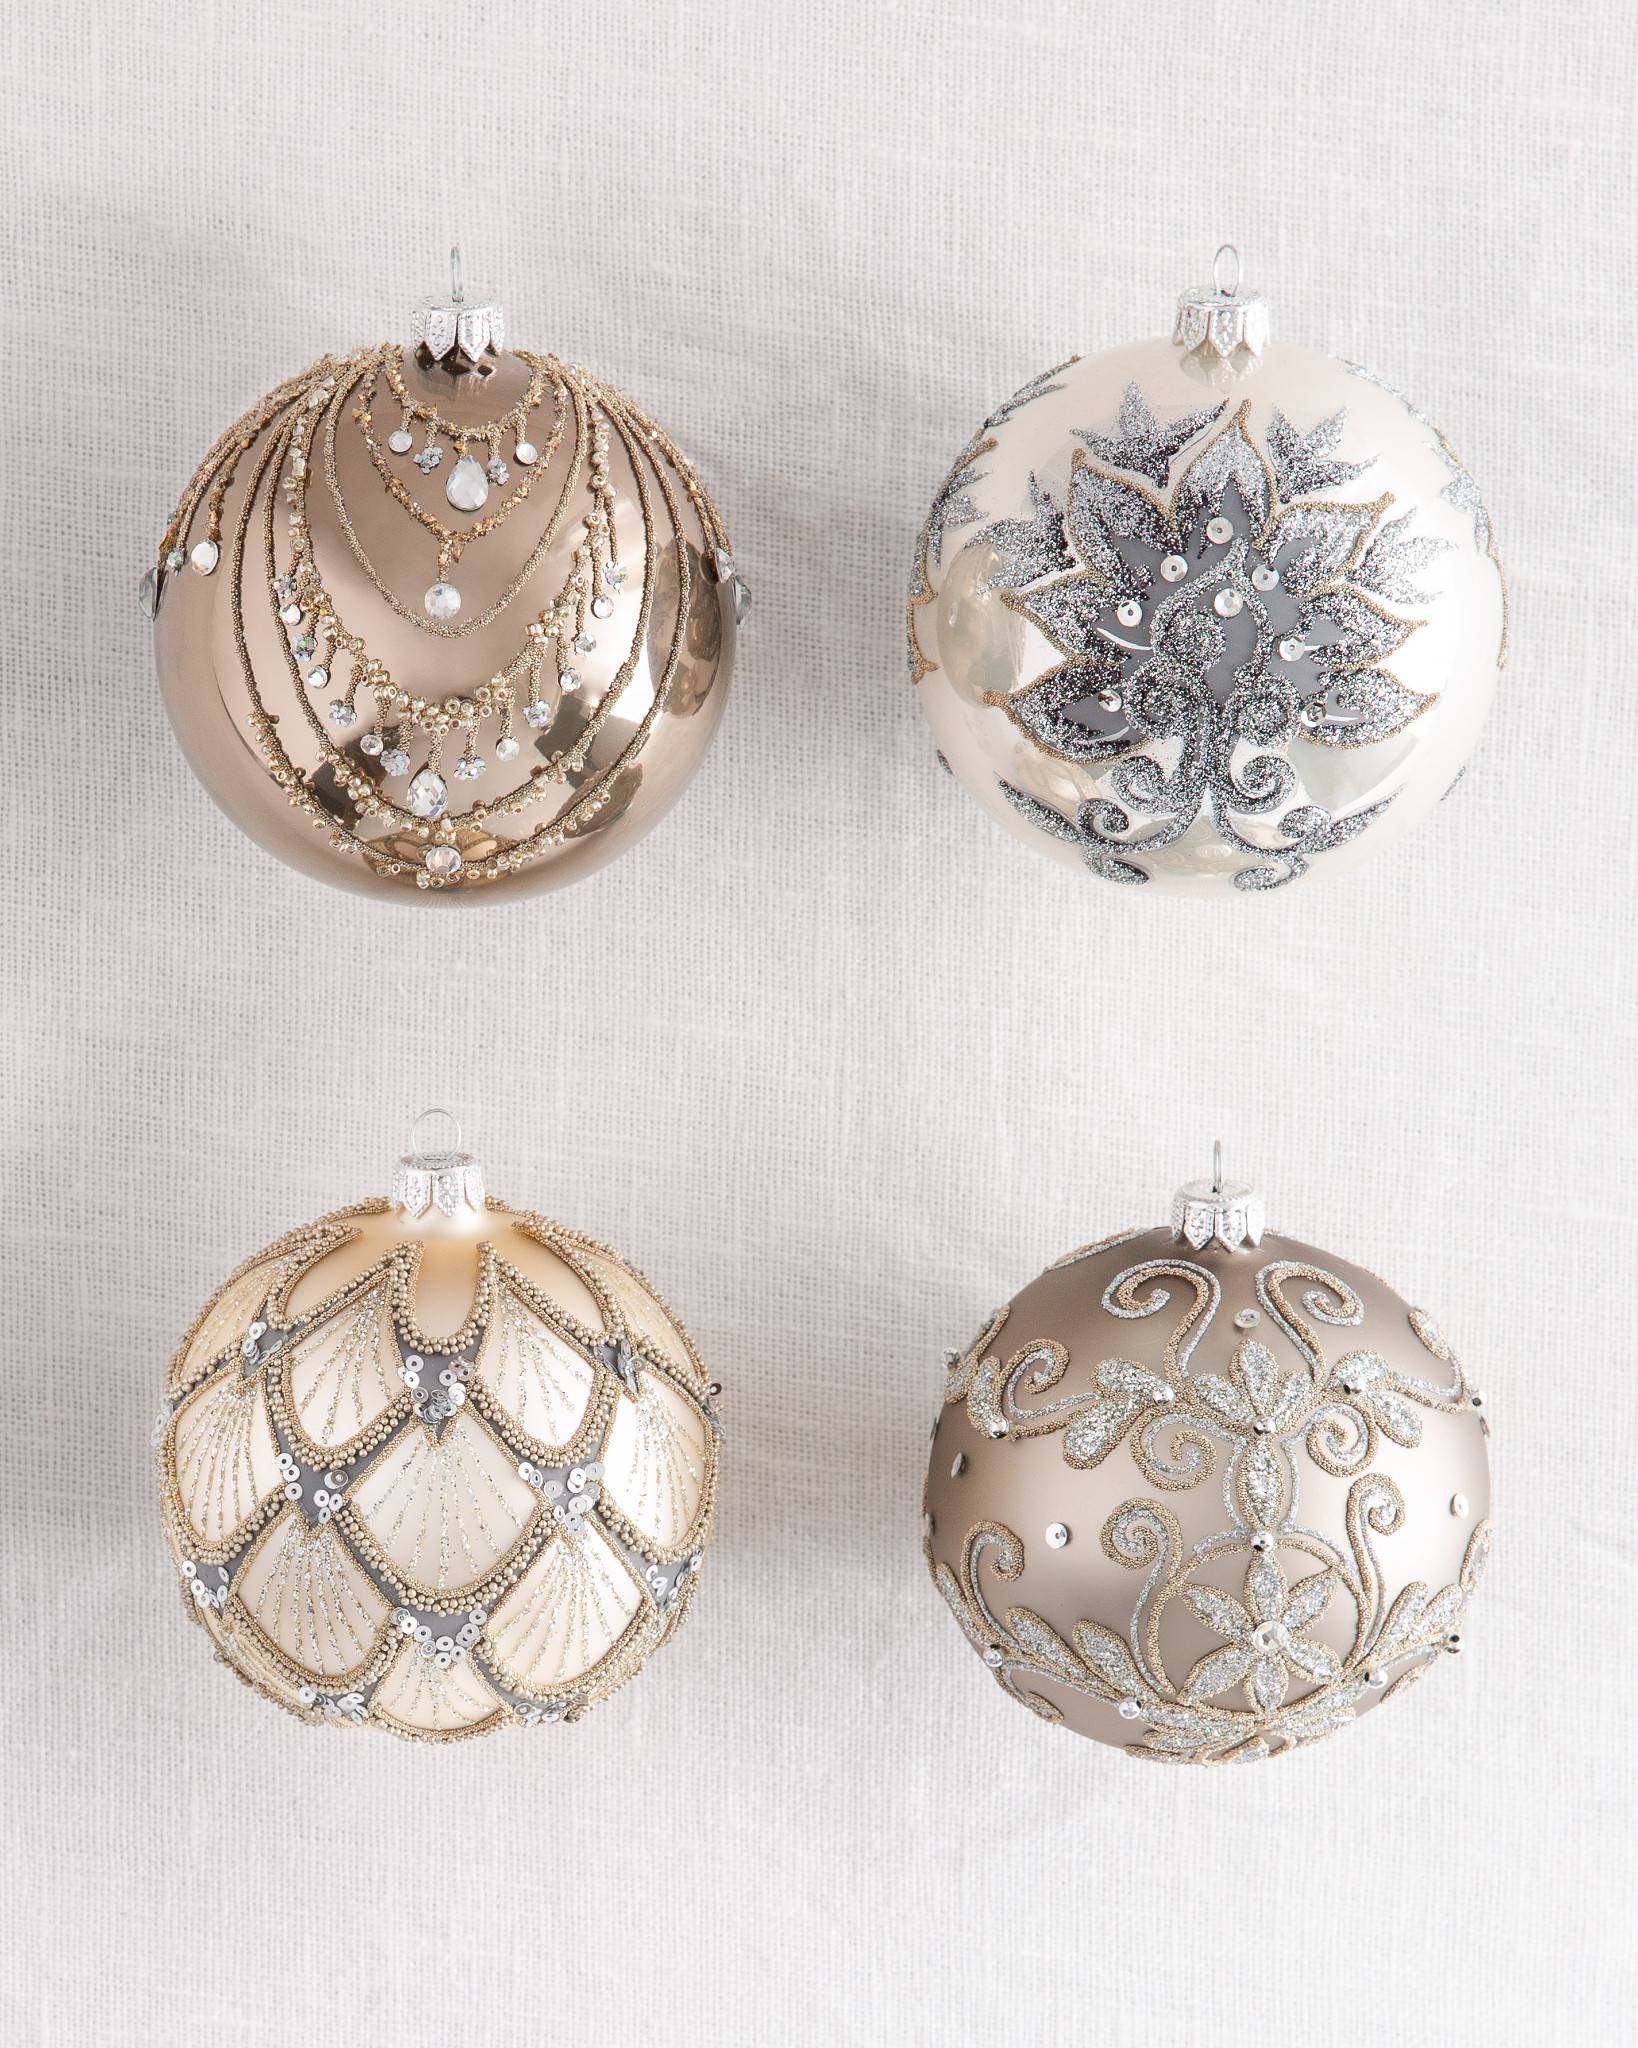 Decorated Glass Ball Christmas Ornament Sets | Balsam Hill